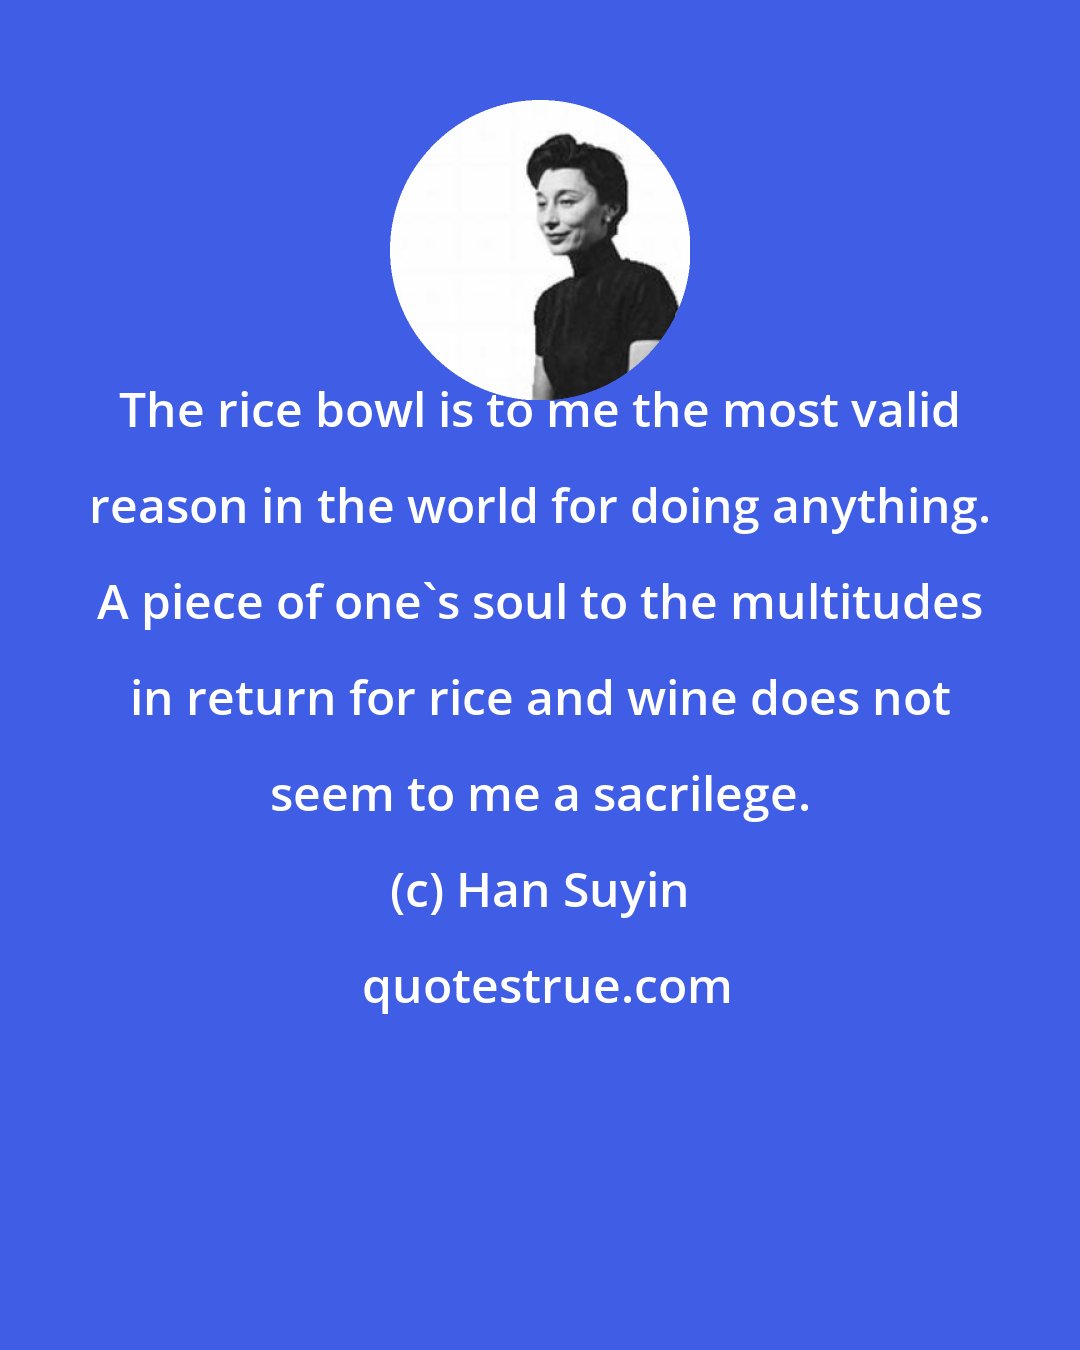 Han Suyin: The rice bowl is to me the most valid reason in the world for doing anything. A piece of one's soul to the multitudes in return for rice and wine does not seem to me a sacrilege.